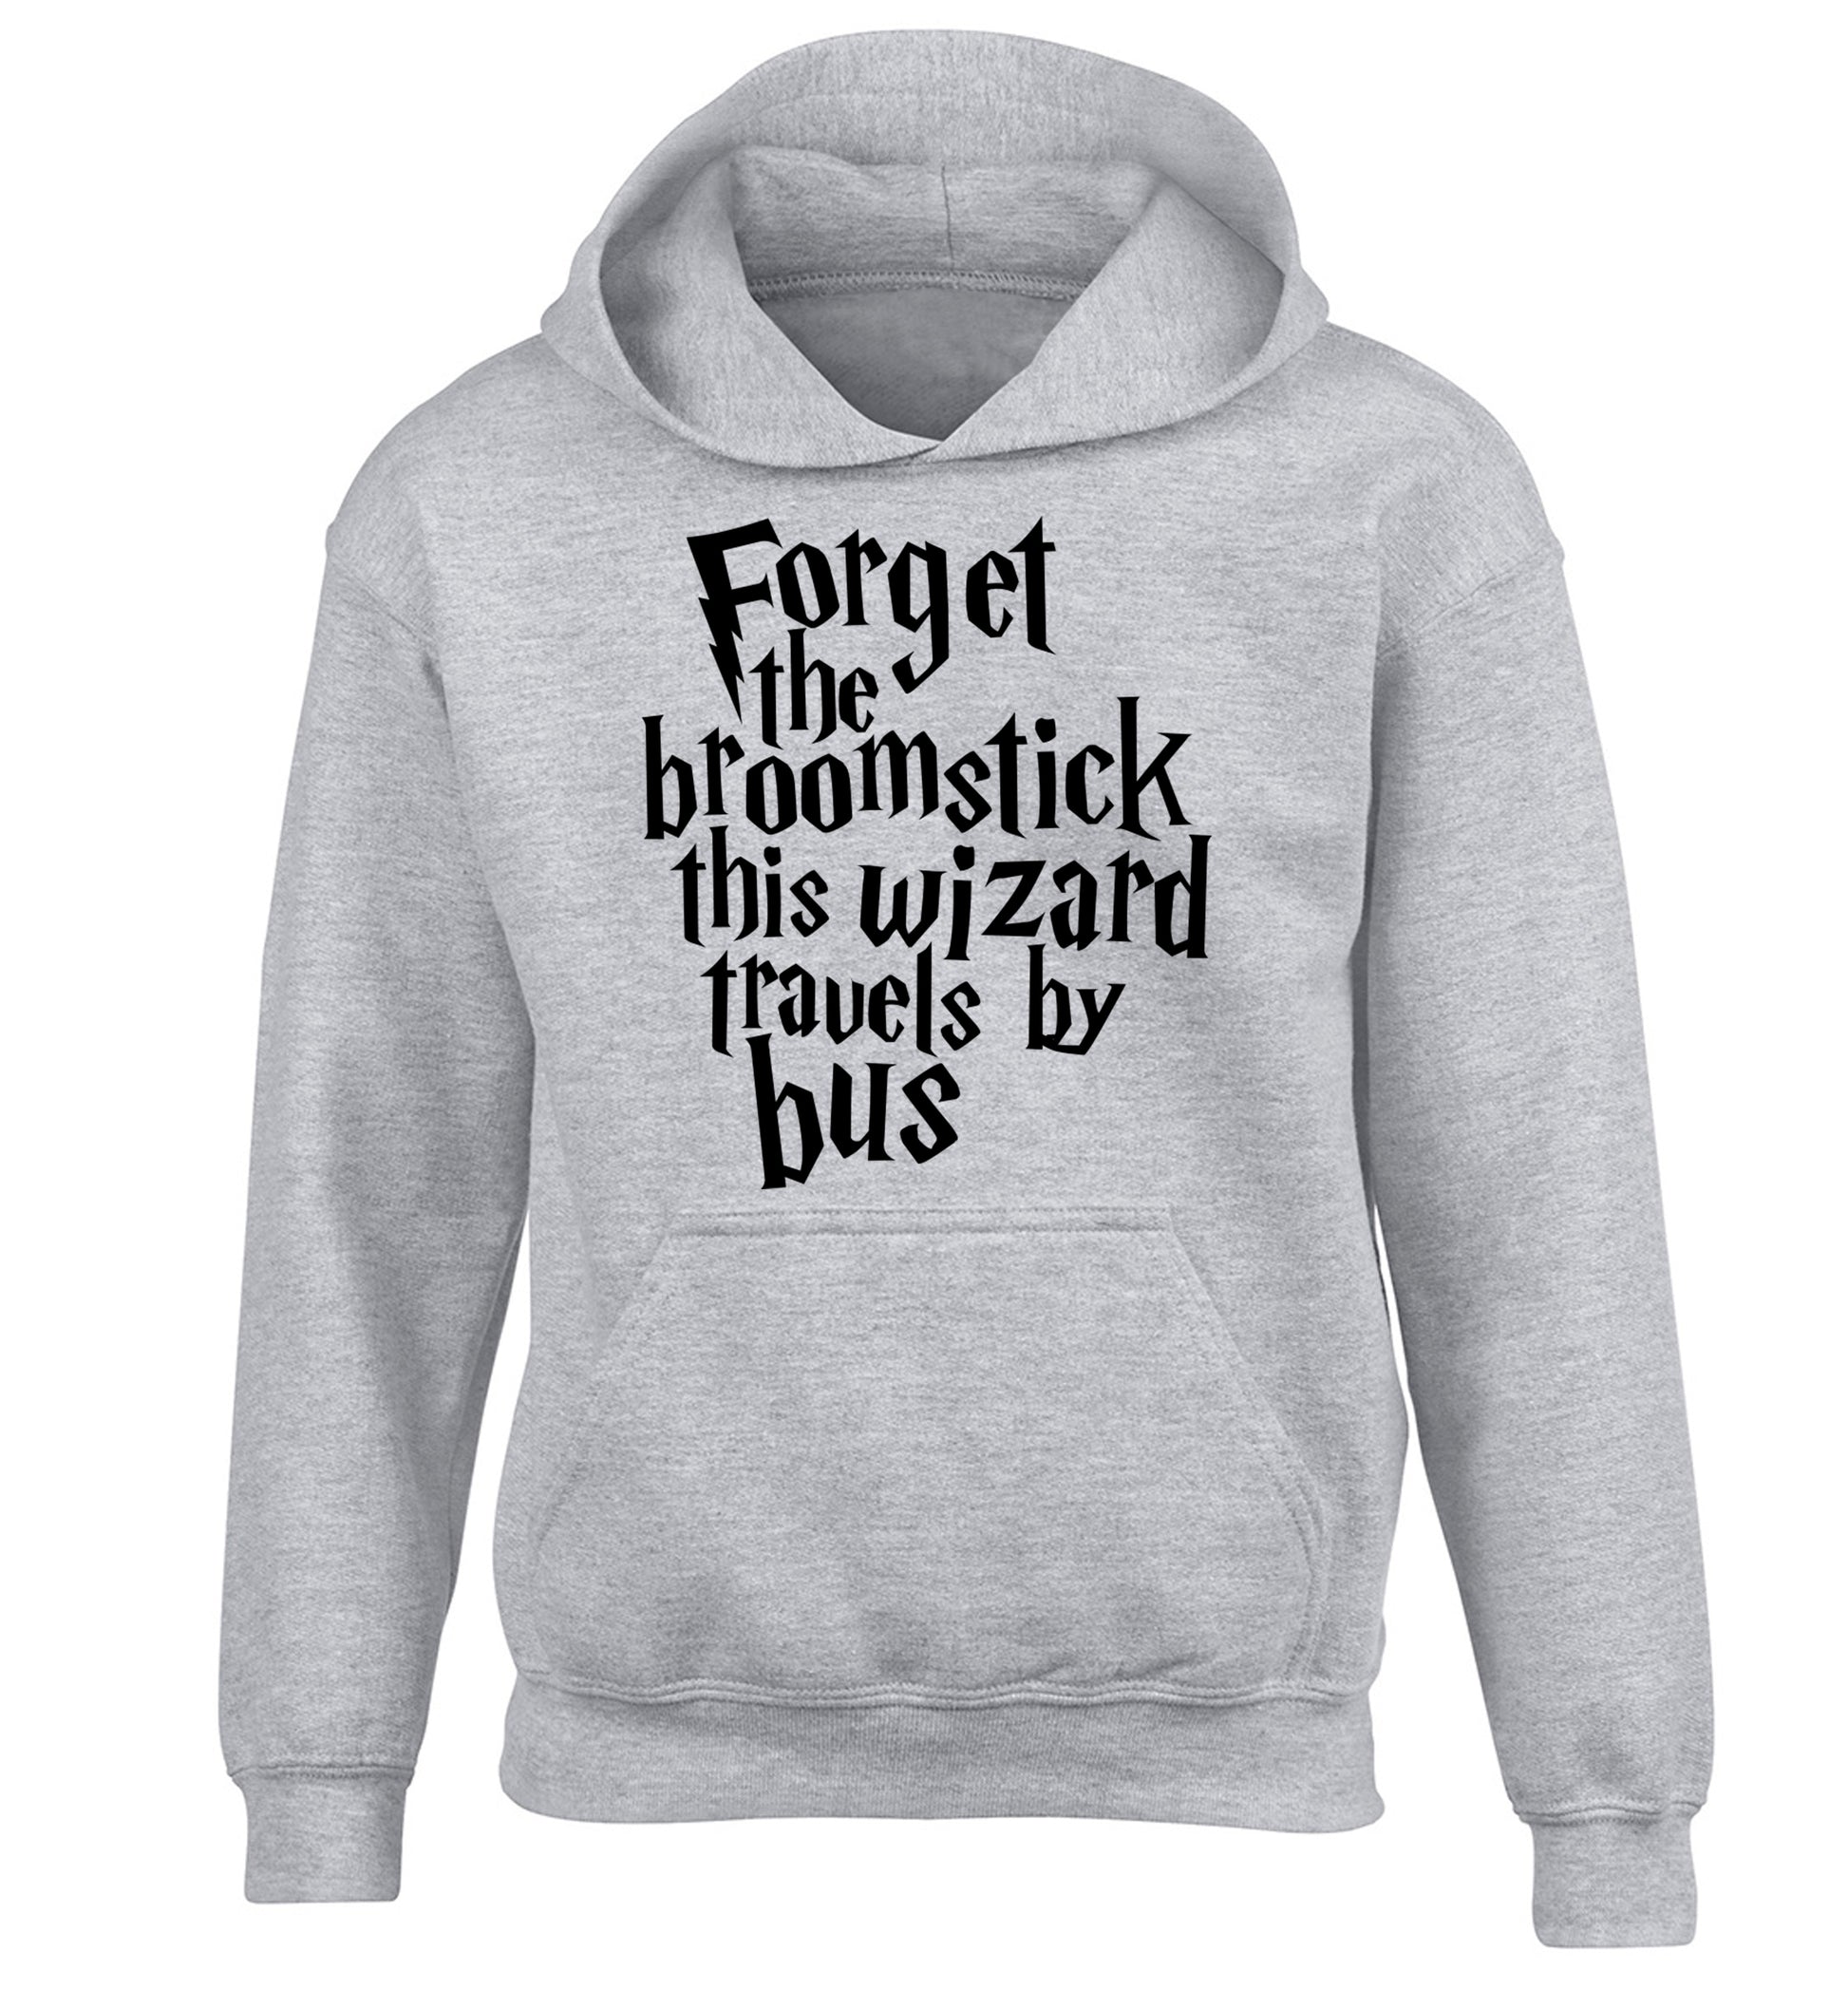 Forget the broomstick this wizard travels by bus children's grey hoodie 12-14 Years